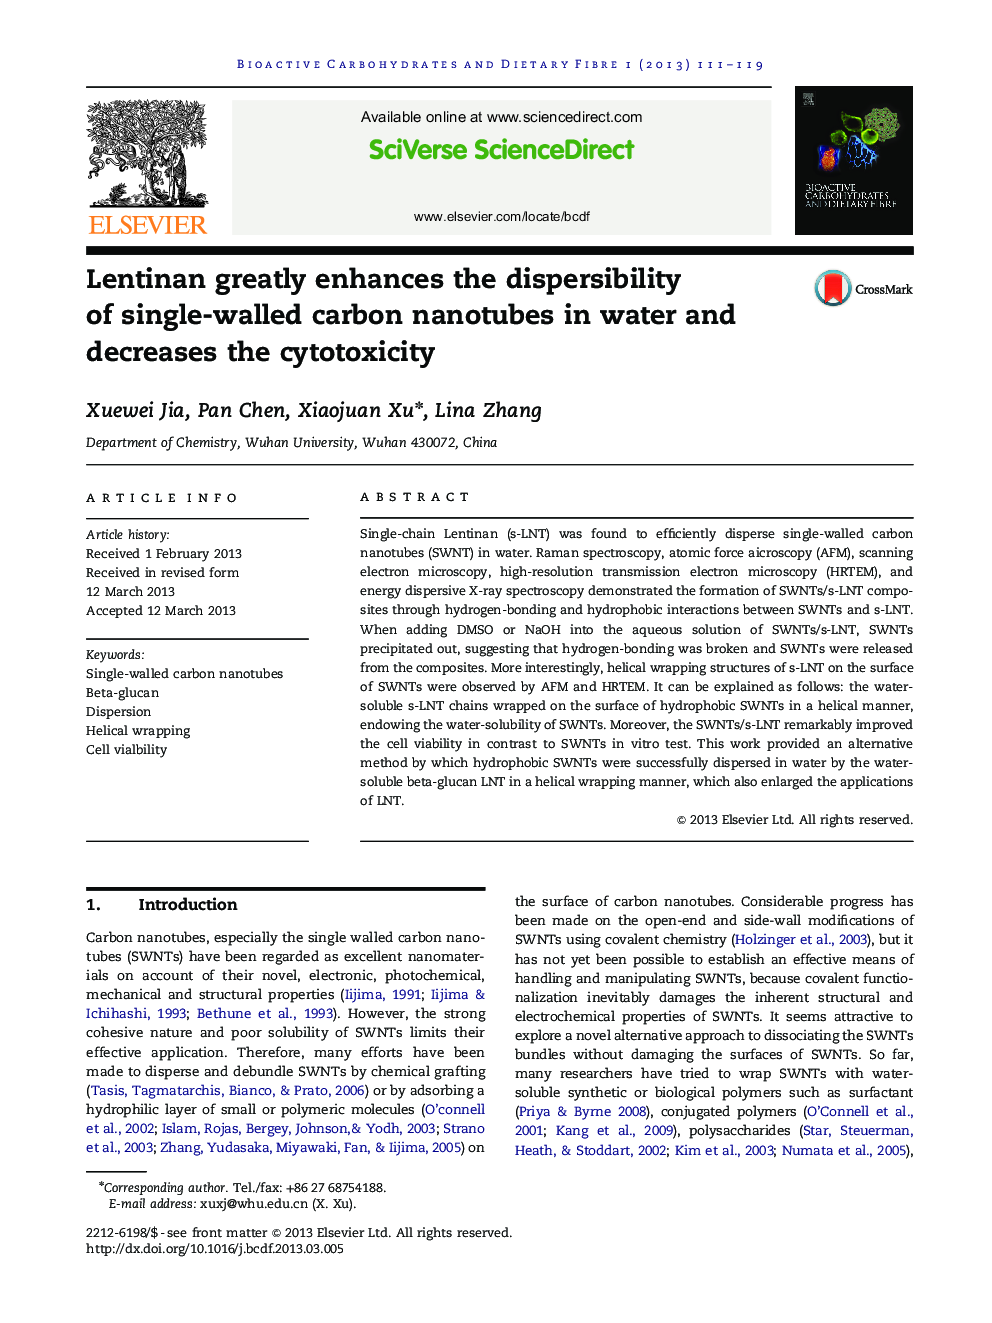 Lentinan greatly enhances the dispersibility of single-walled carbon nanotubes in water and decreases the cytotoxicity